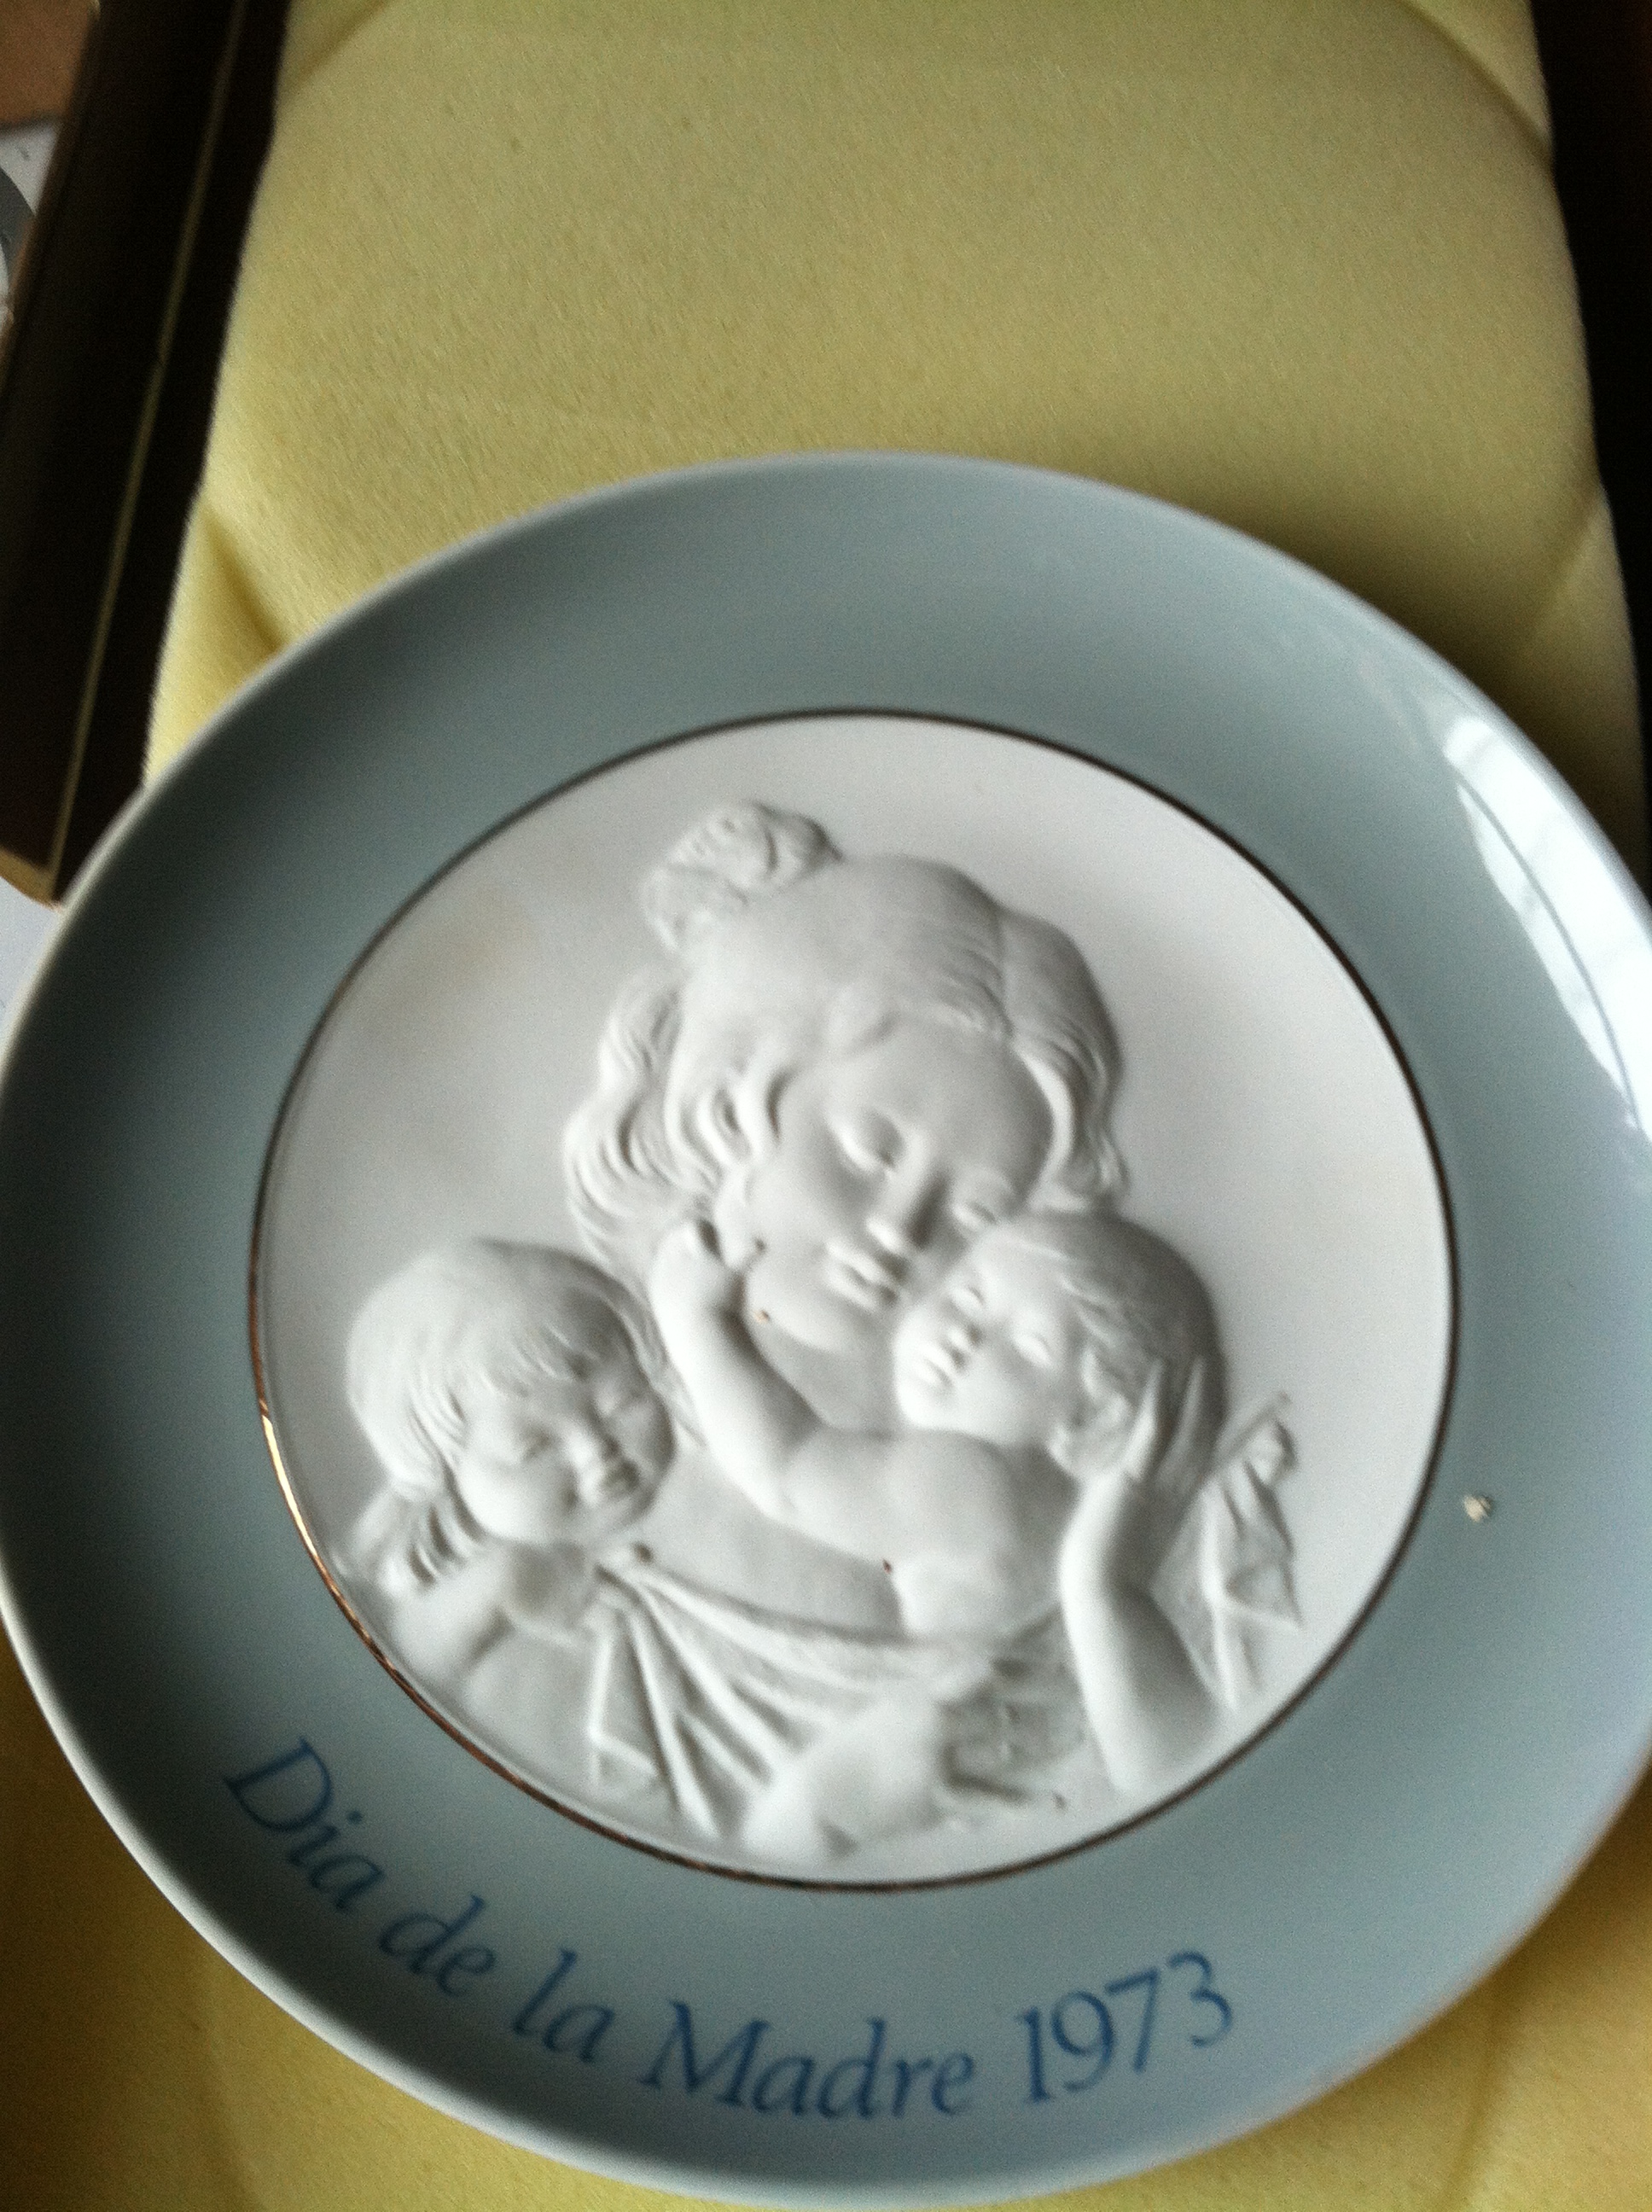 Lladro Plate Made in spain